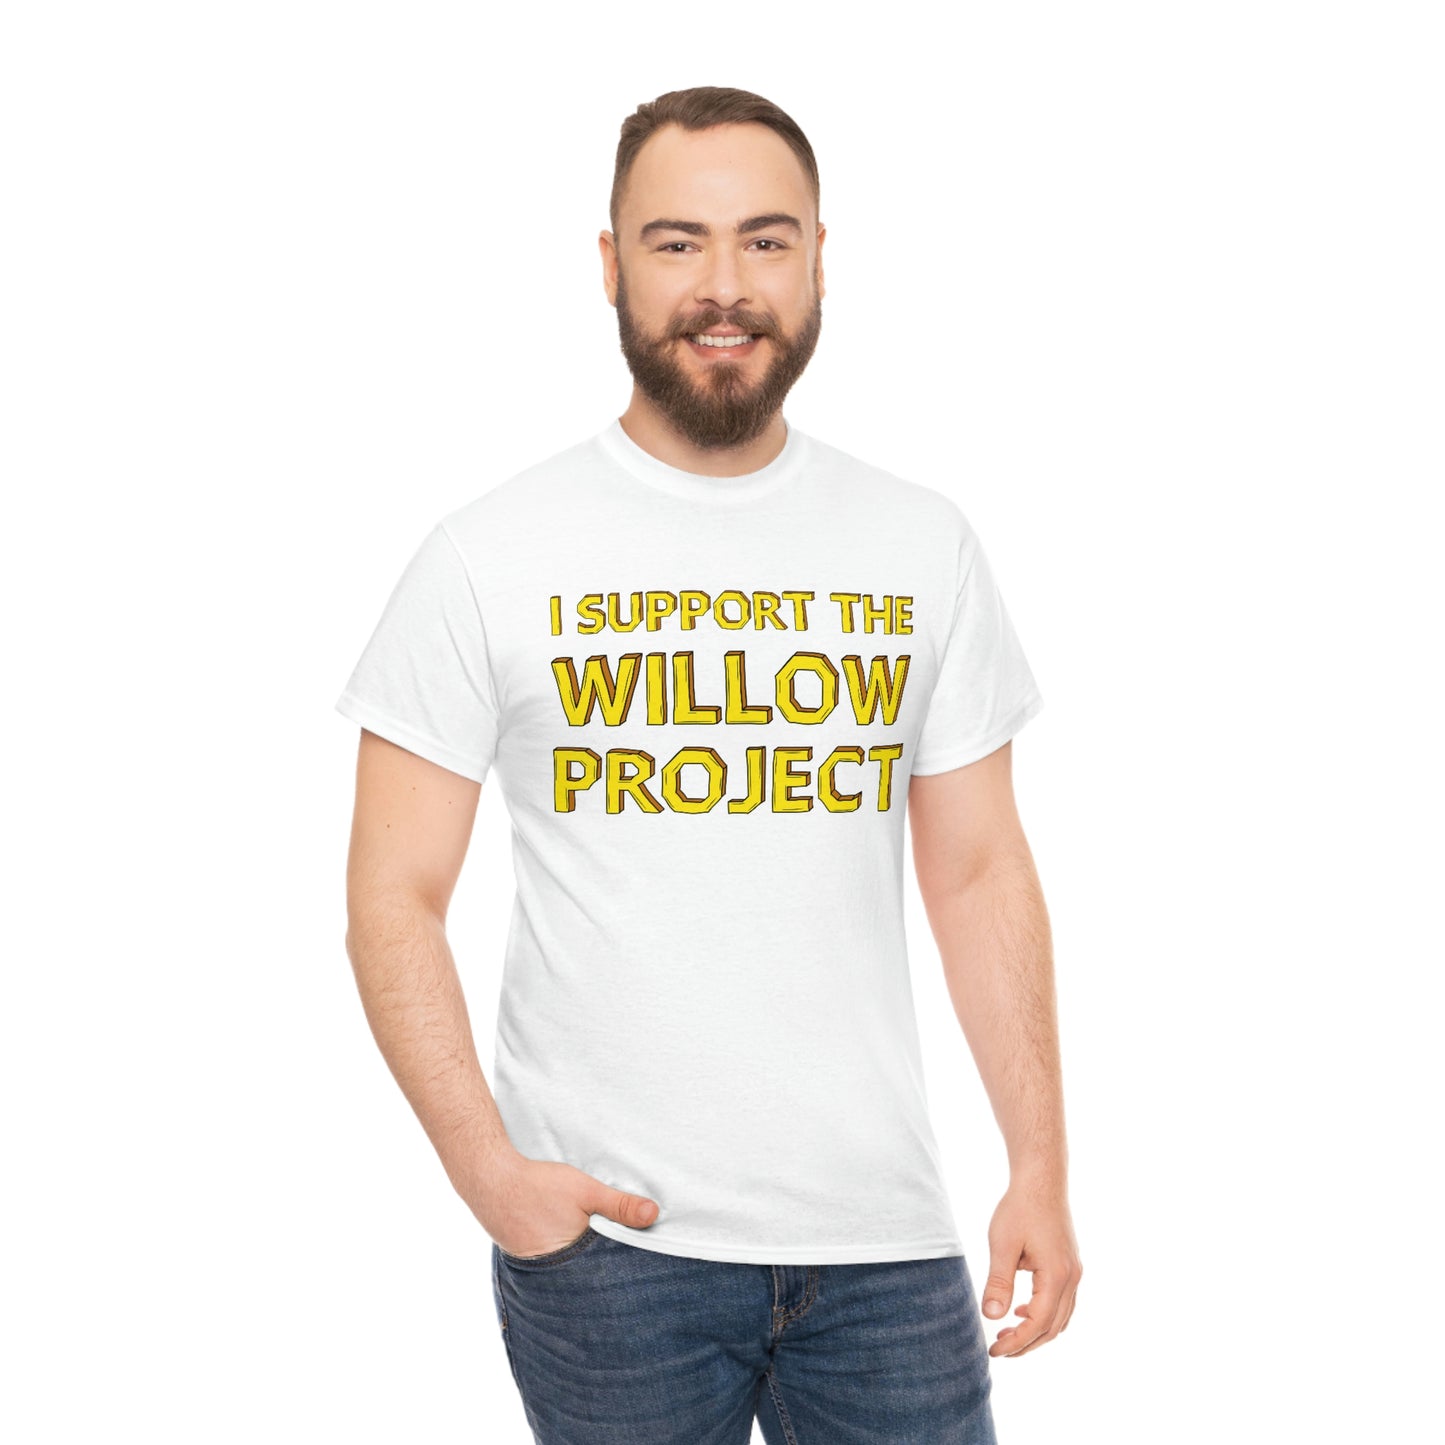 I Support the Willow Project - Unisex Heavy Cotton Tee